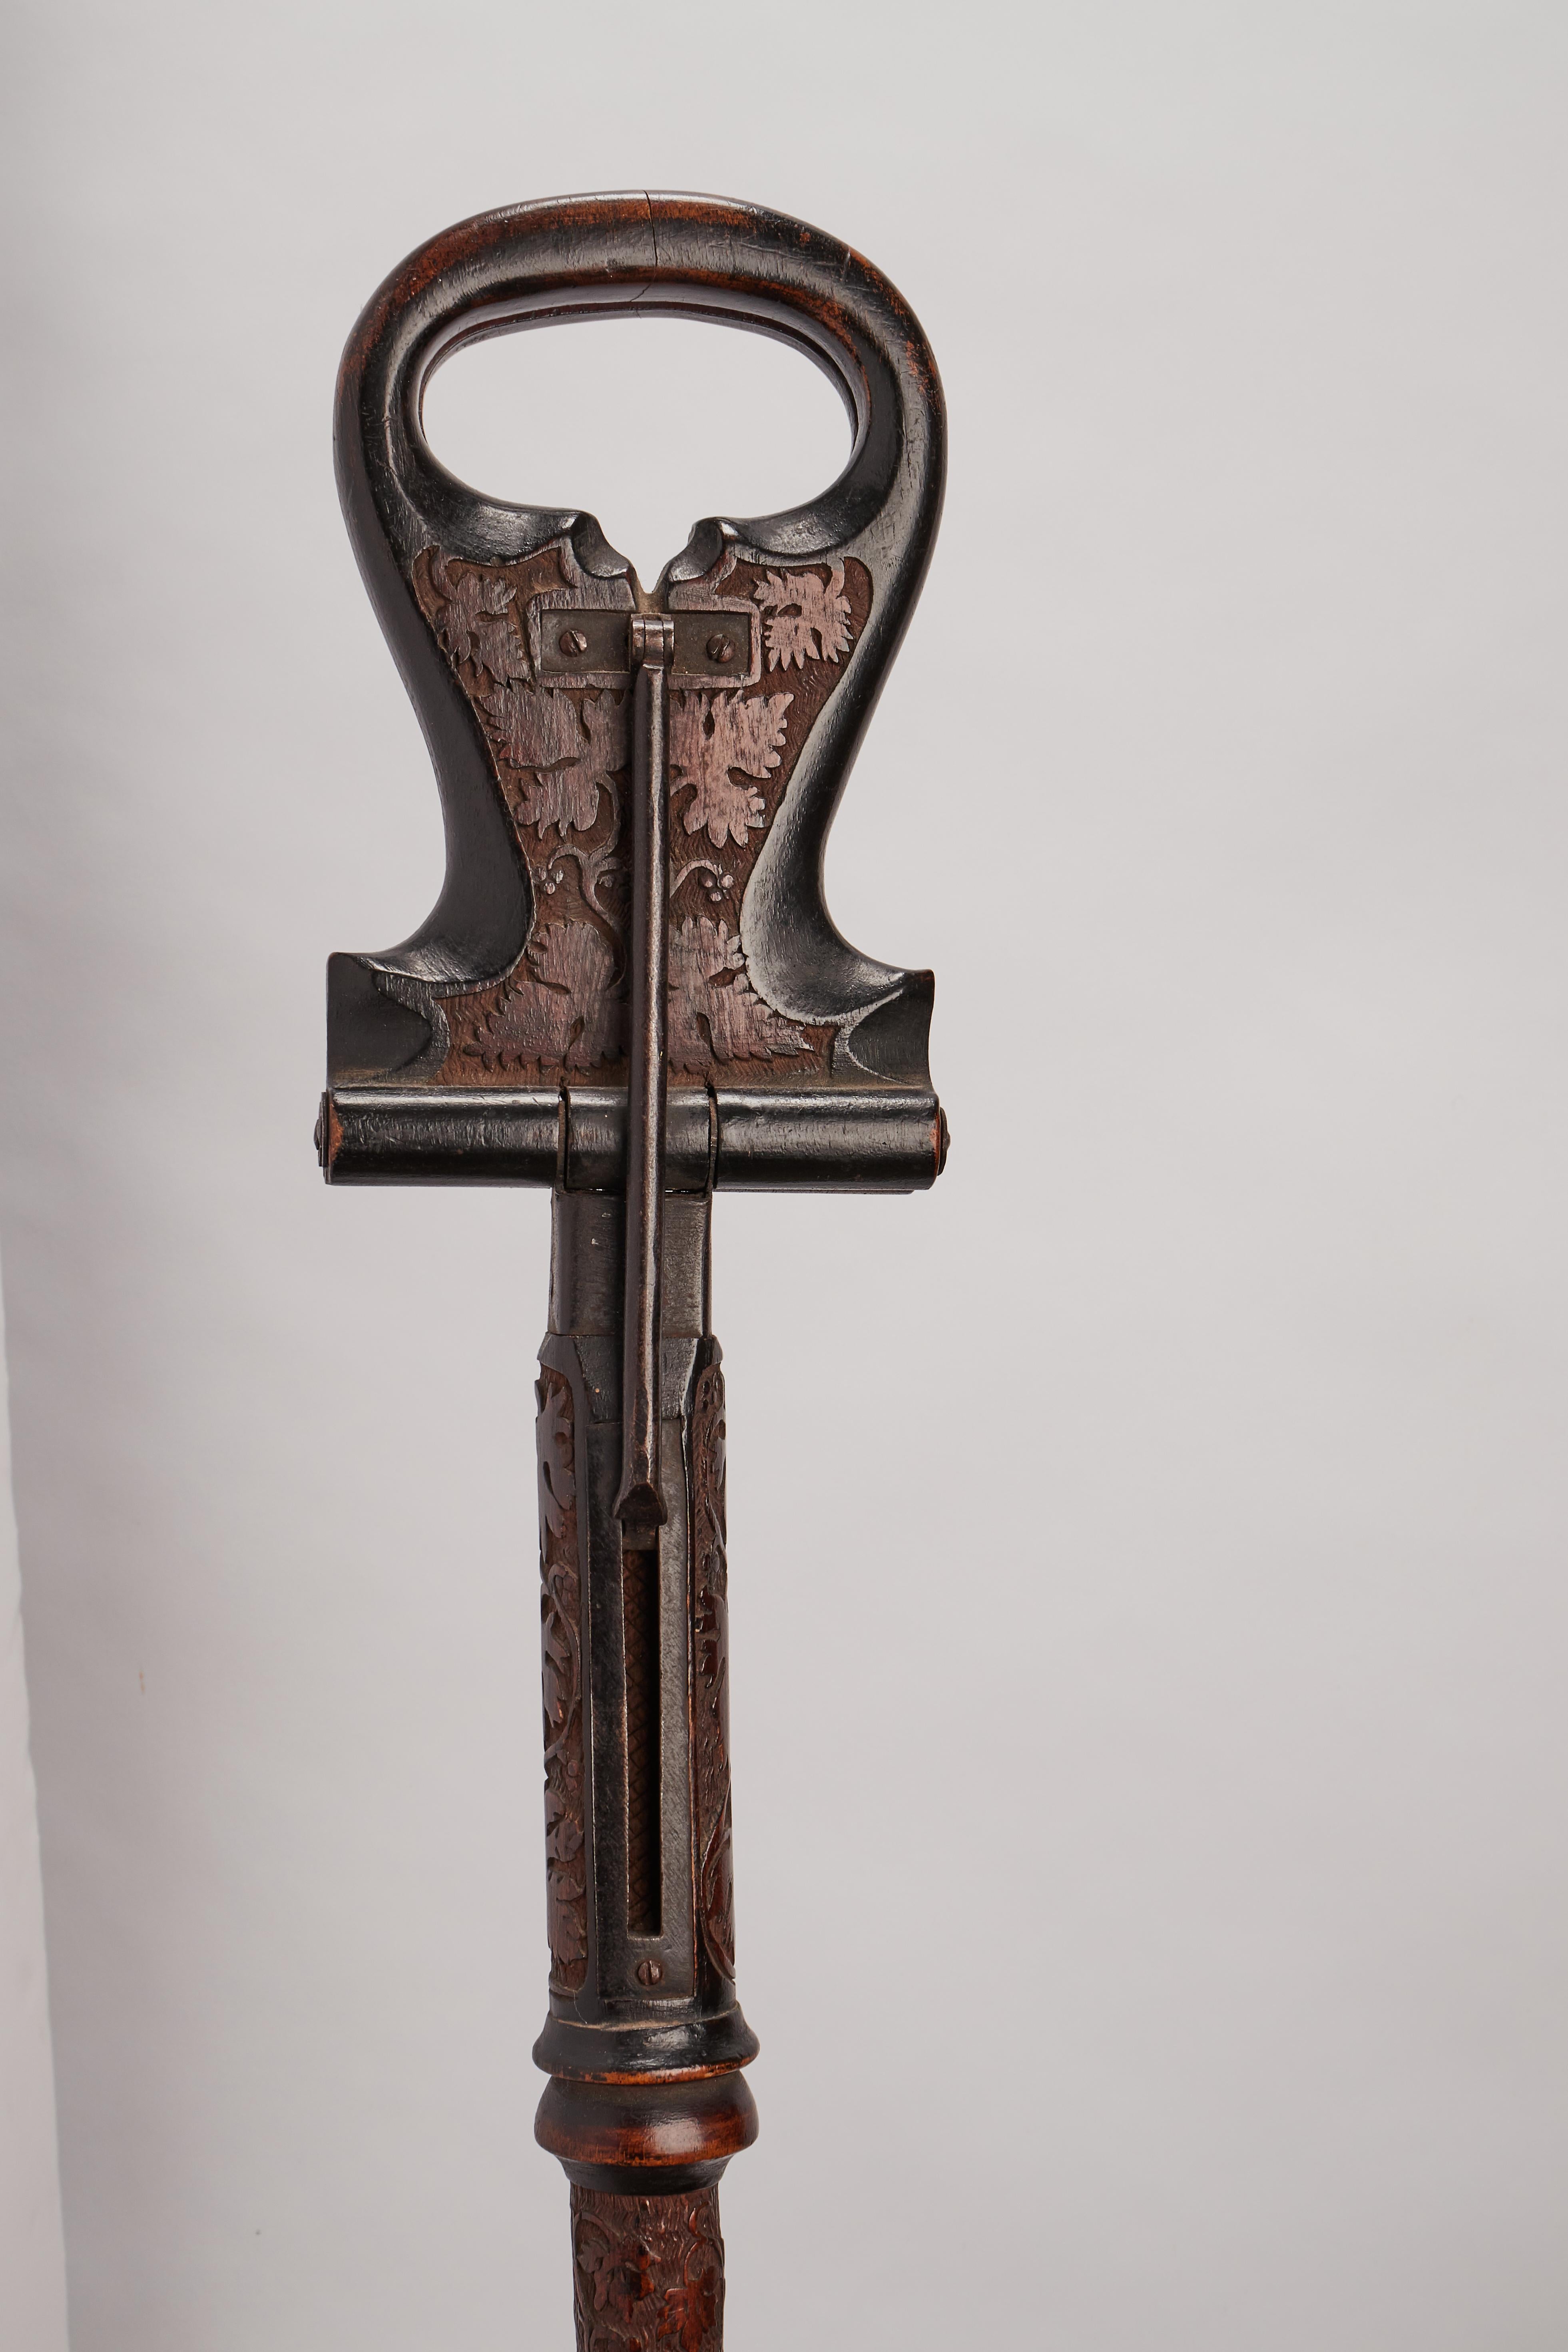 Gadget-System Folk Art walking stick: a stick with the seat function. Carved wooden seat and iron parts depicting the grape leaves and metal ferrule, France, circa 1880.